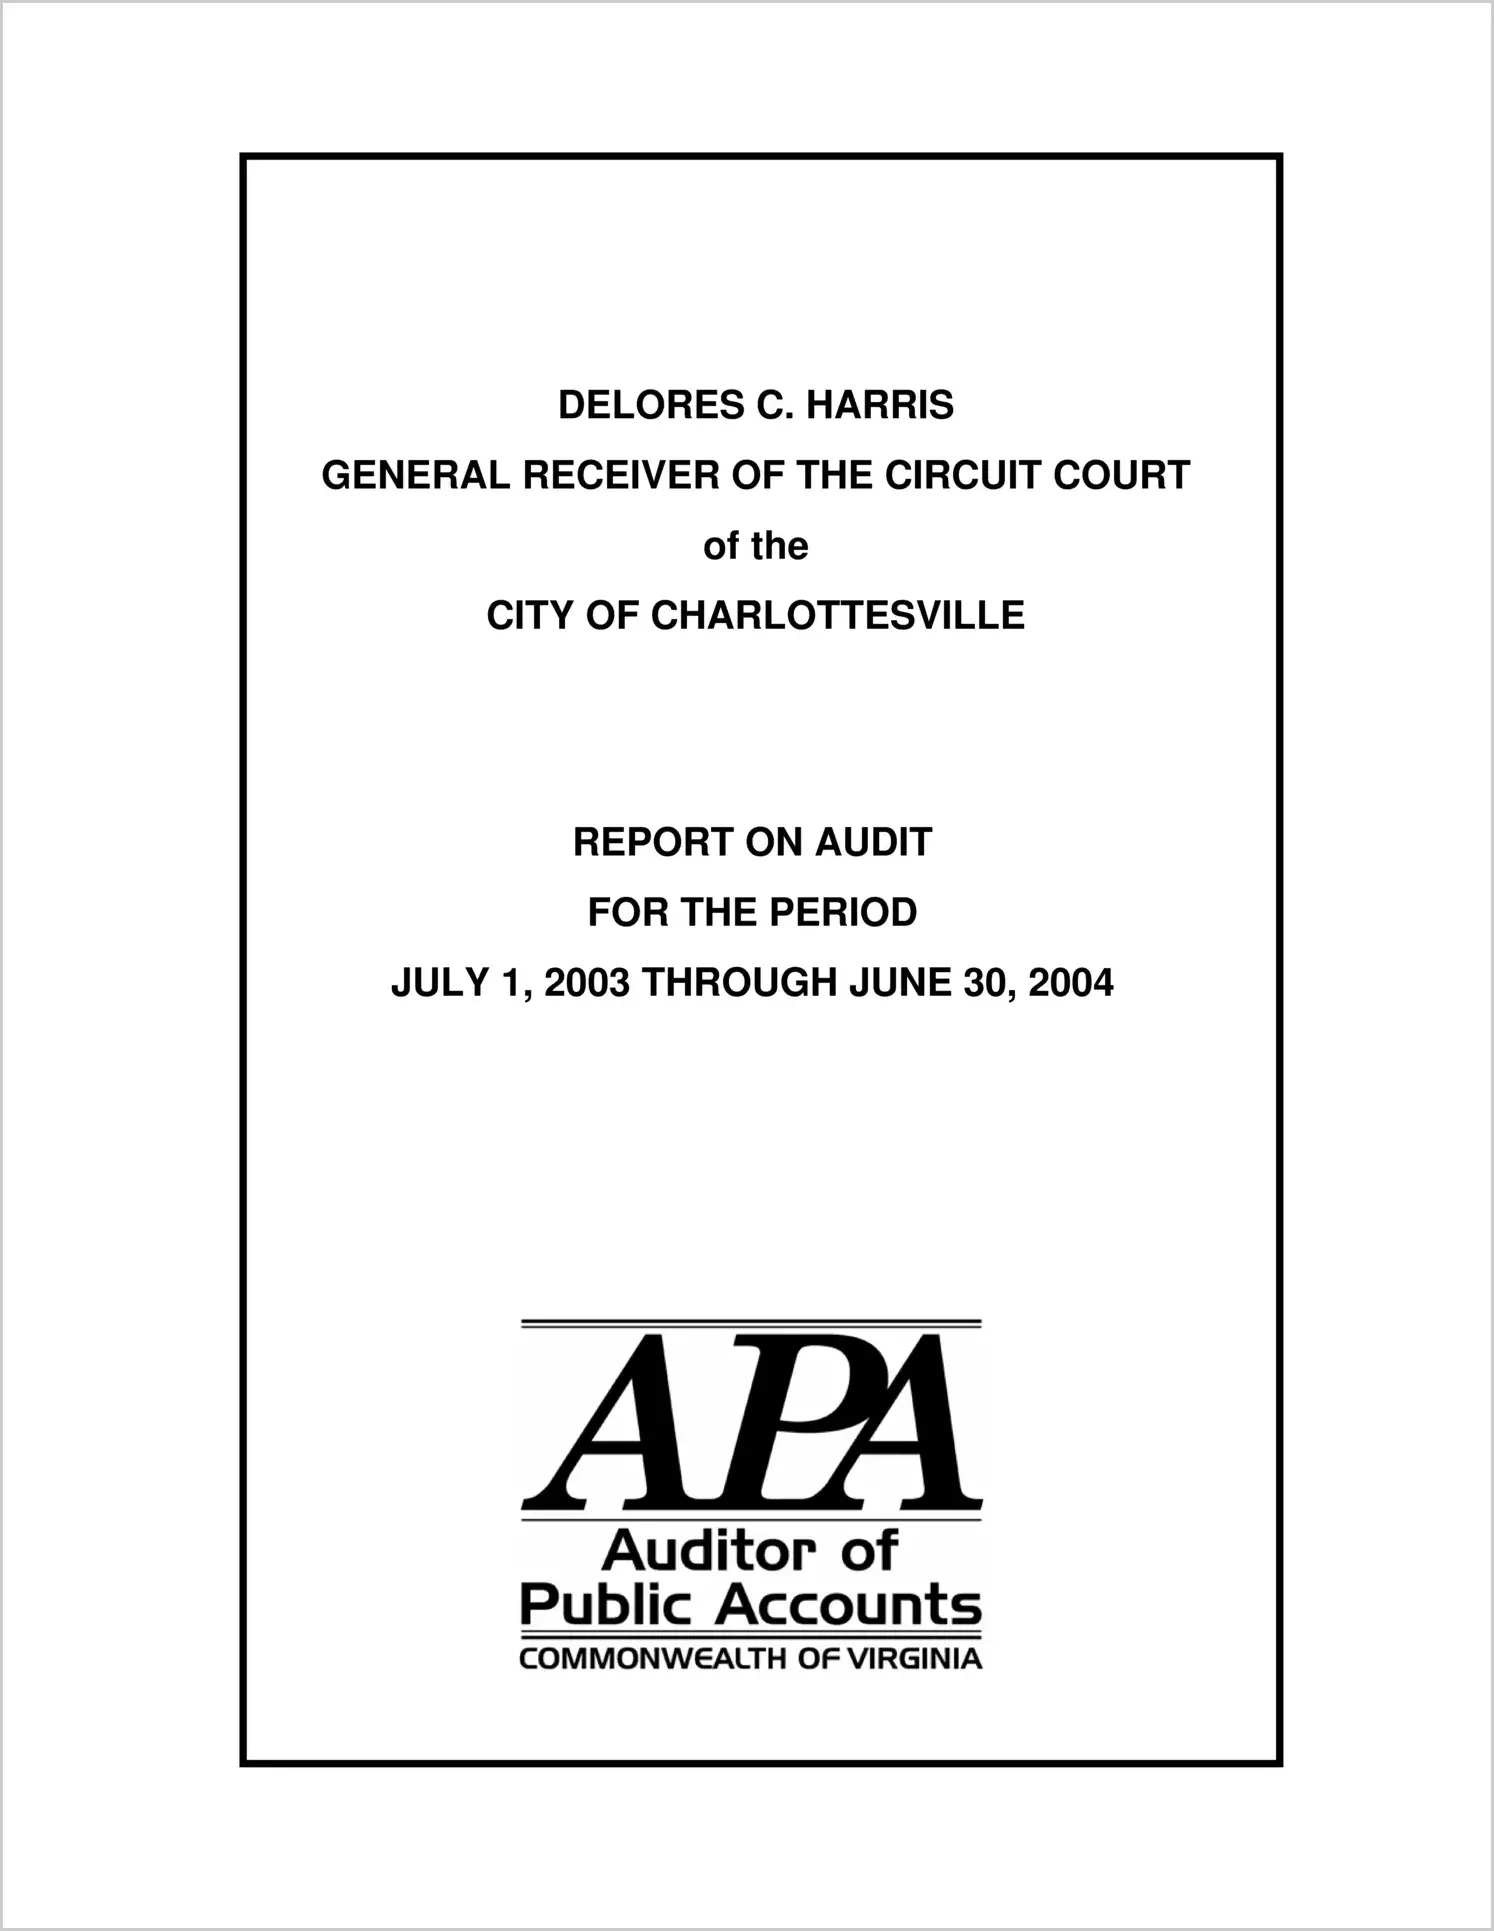 General Receiver of the Circuit Court for the period July 1, 2003 through June 30, 2004